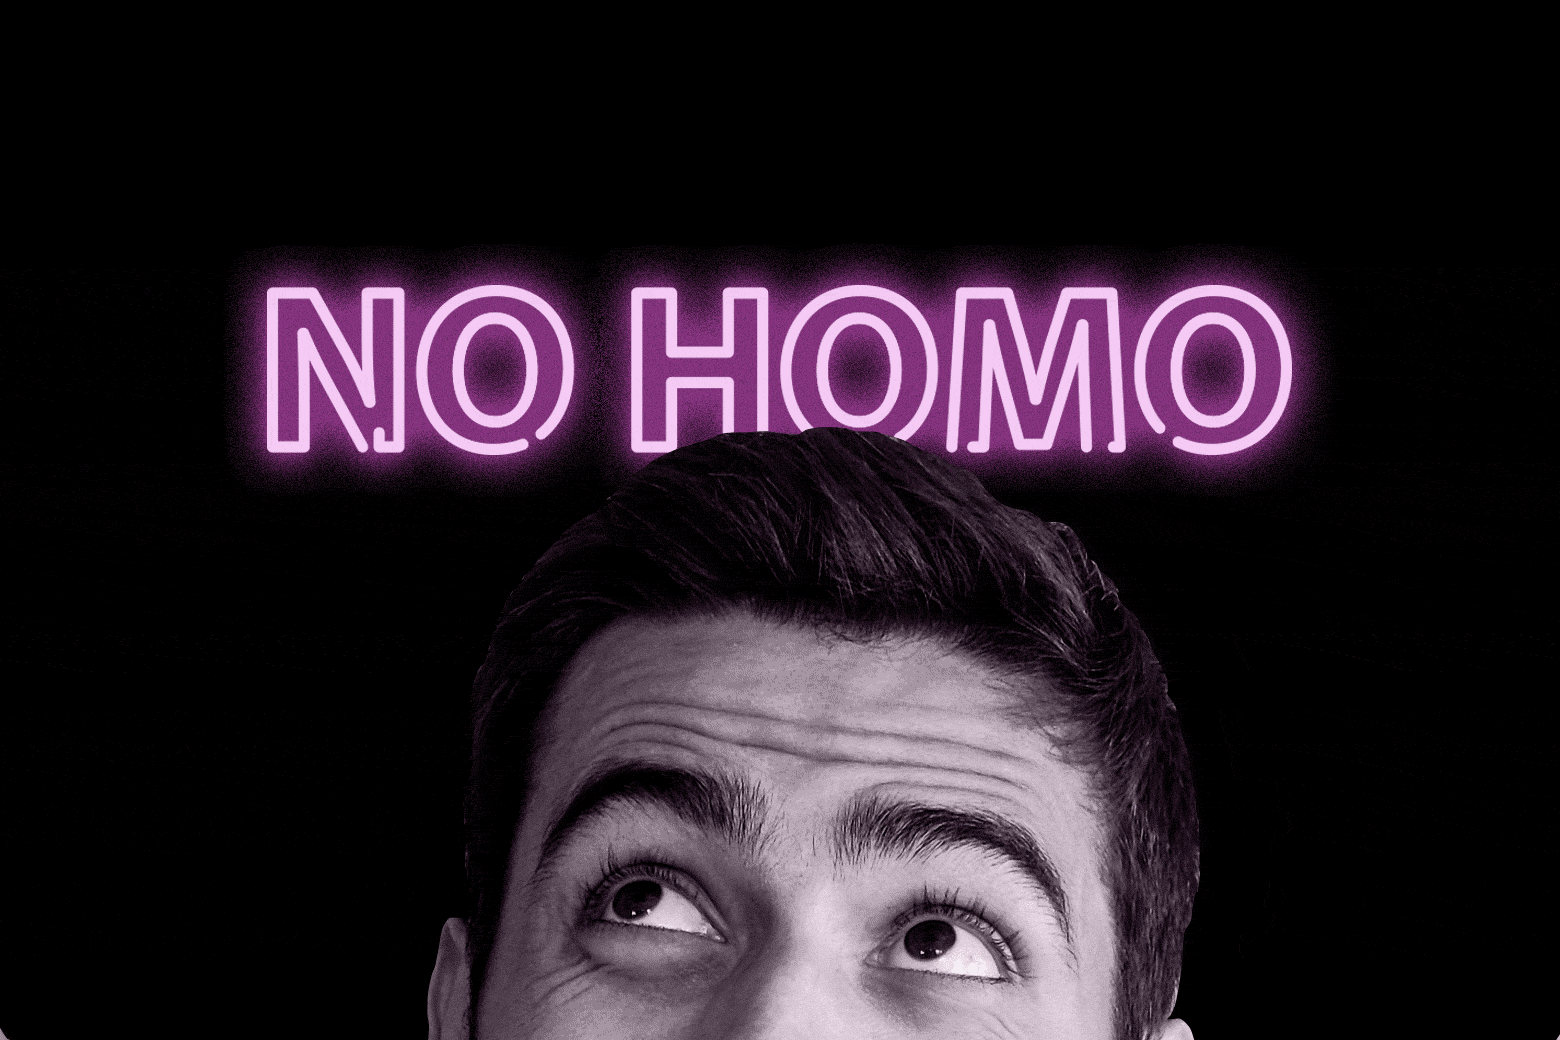 A man looks up as if thinking. Neon lights spell out "NO HOMO" behind him.